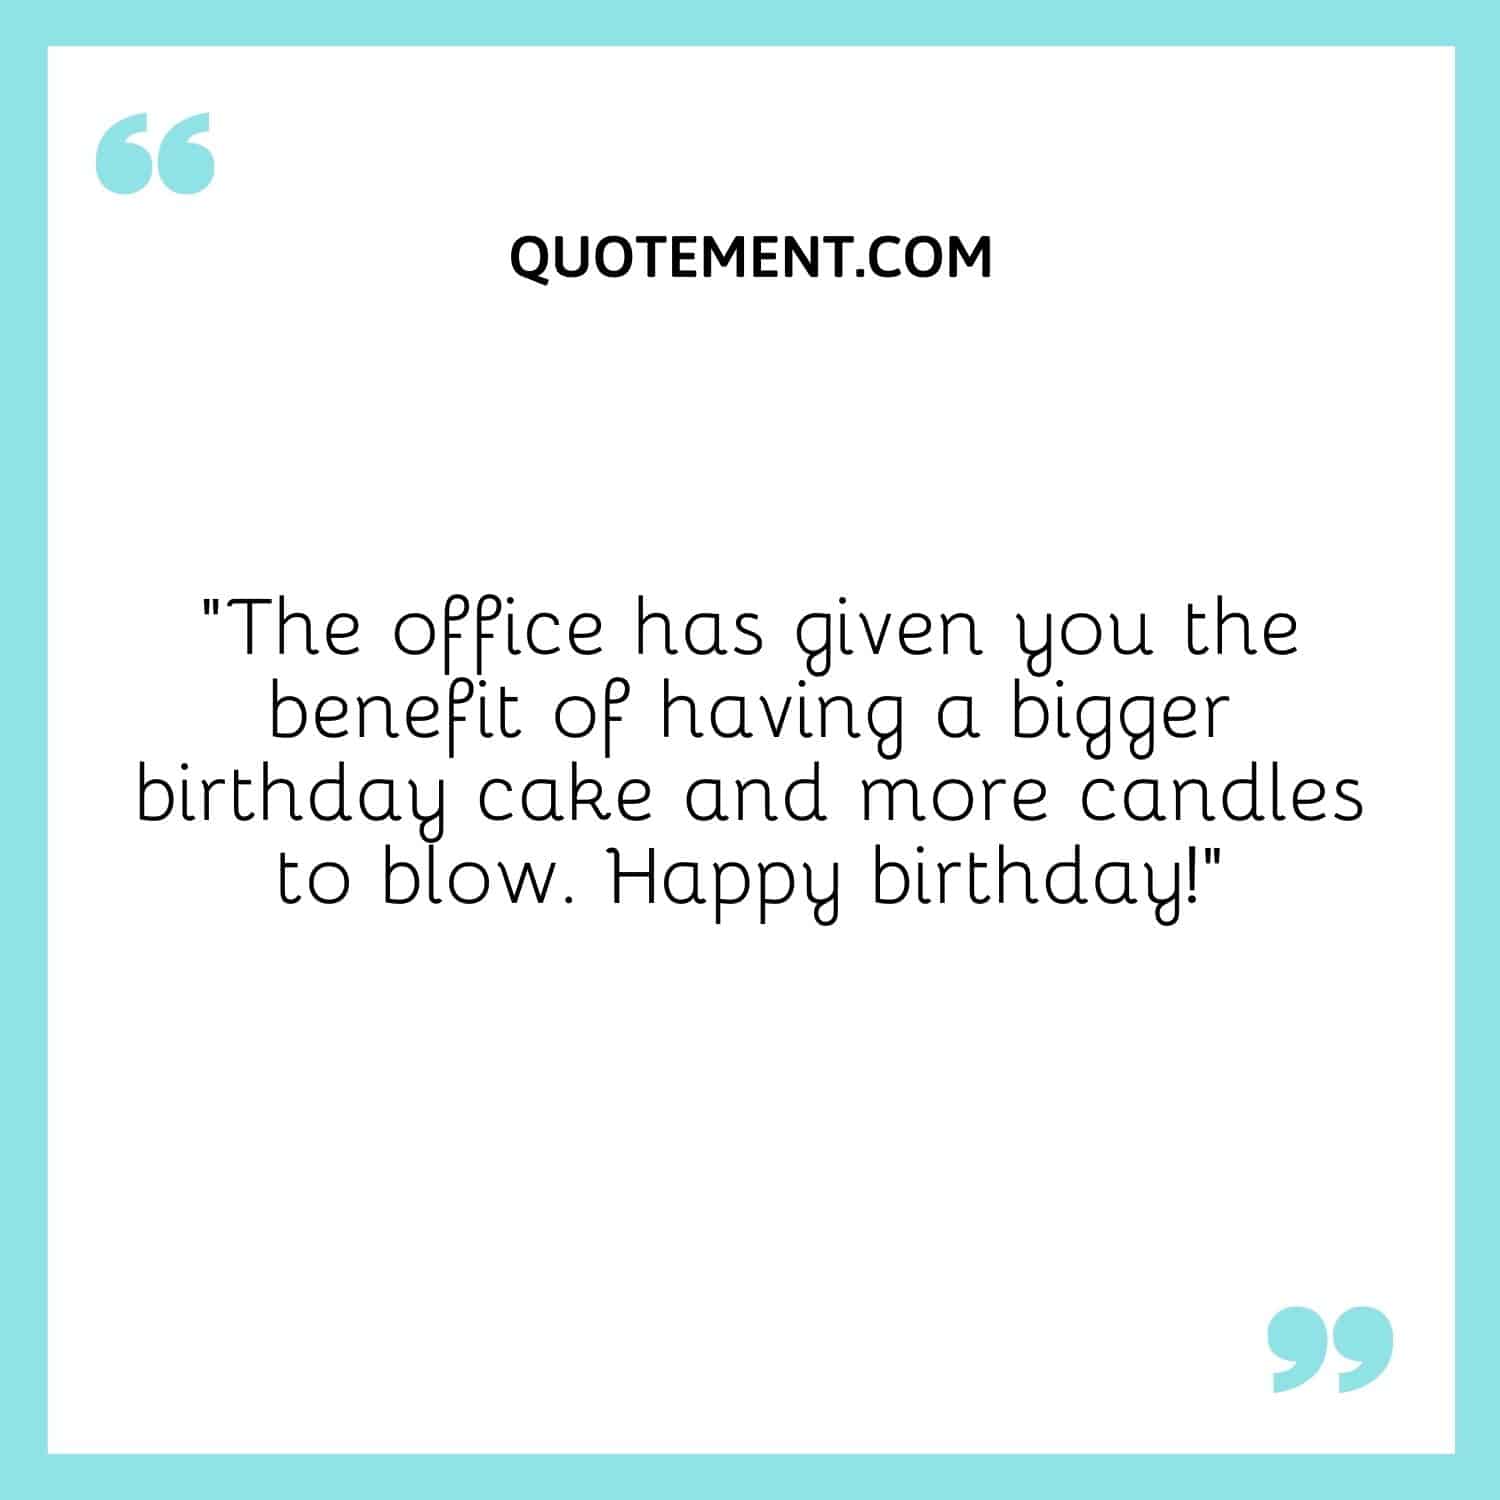 The office has given you the benefit of having a bigger birthday cake